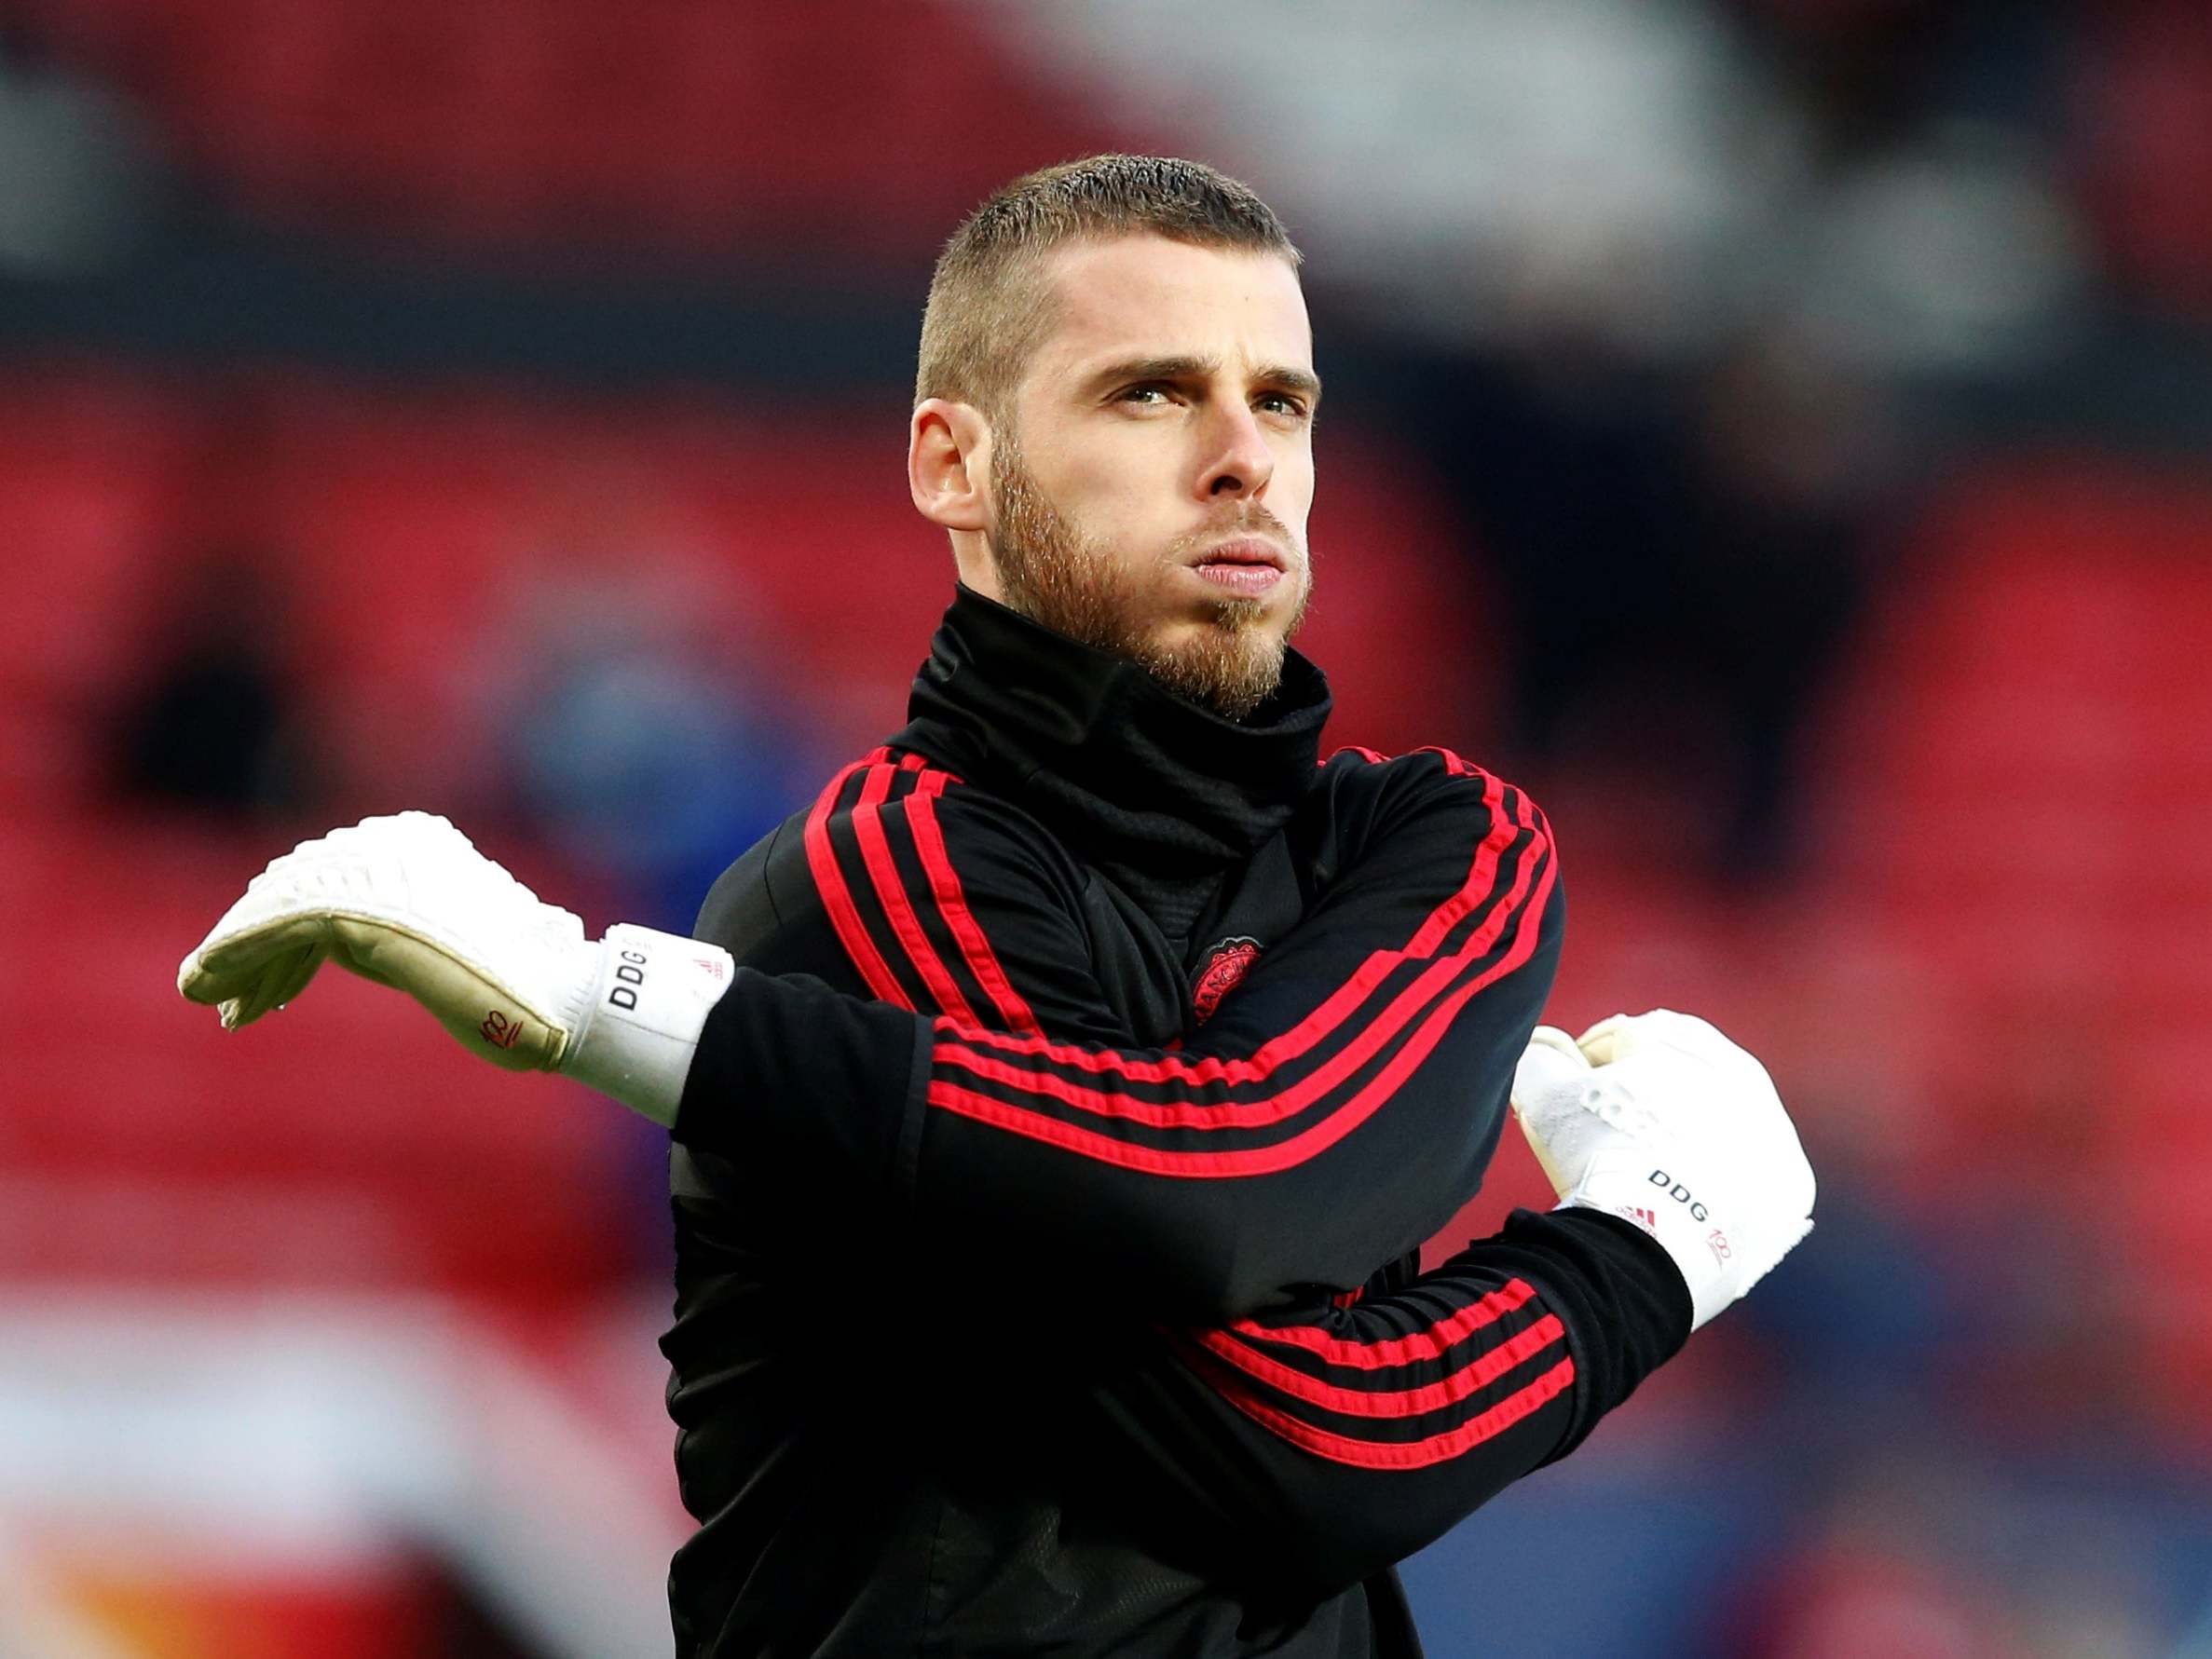 De Gea has been offered a new contract by United